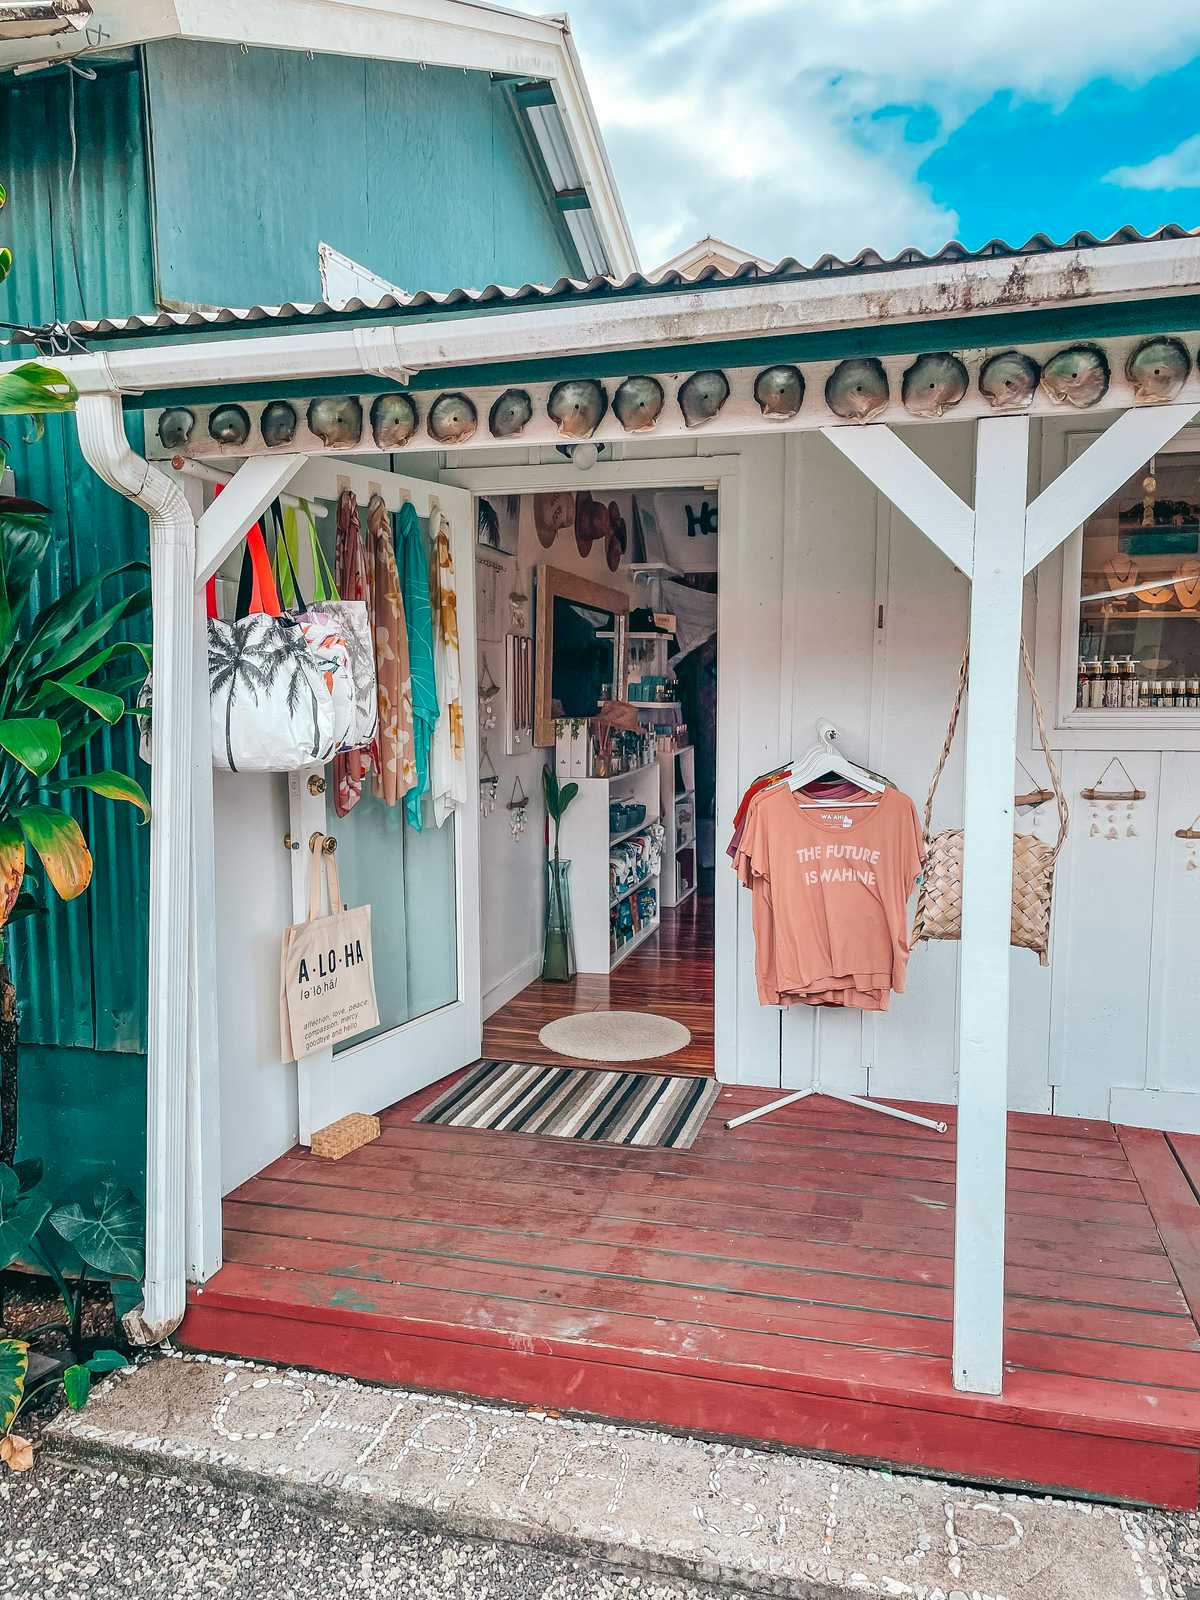 One of the adorable shops in Hanalei